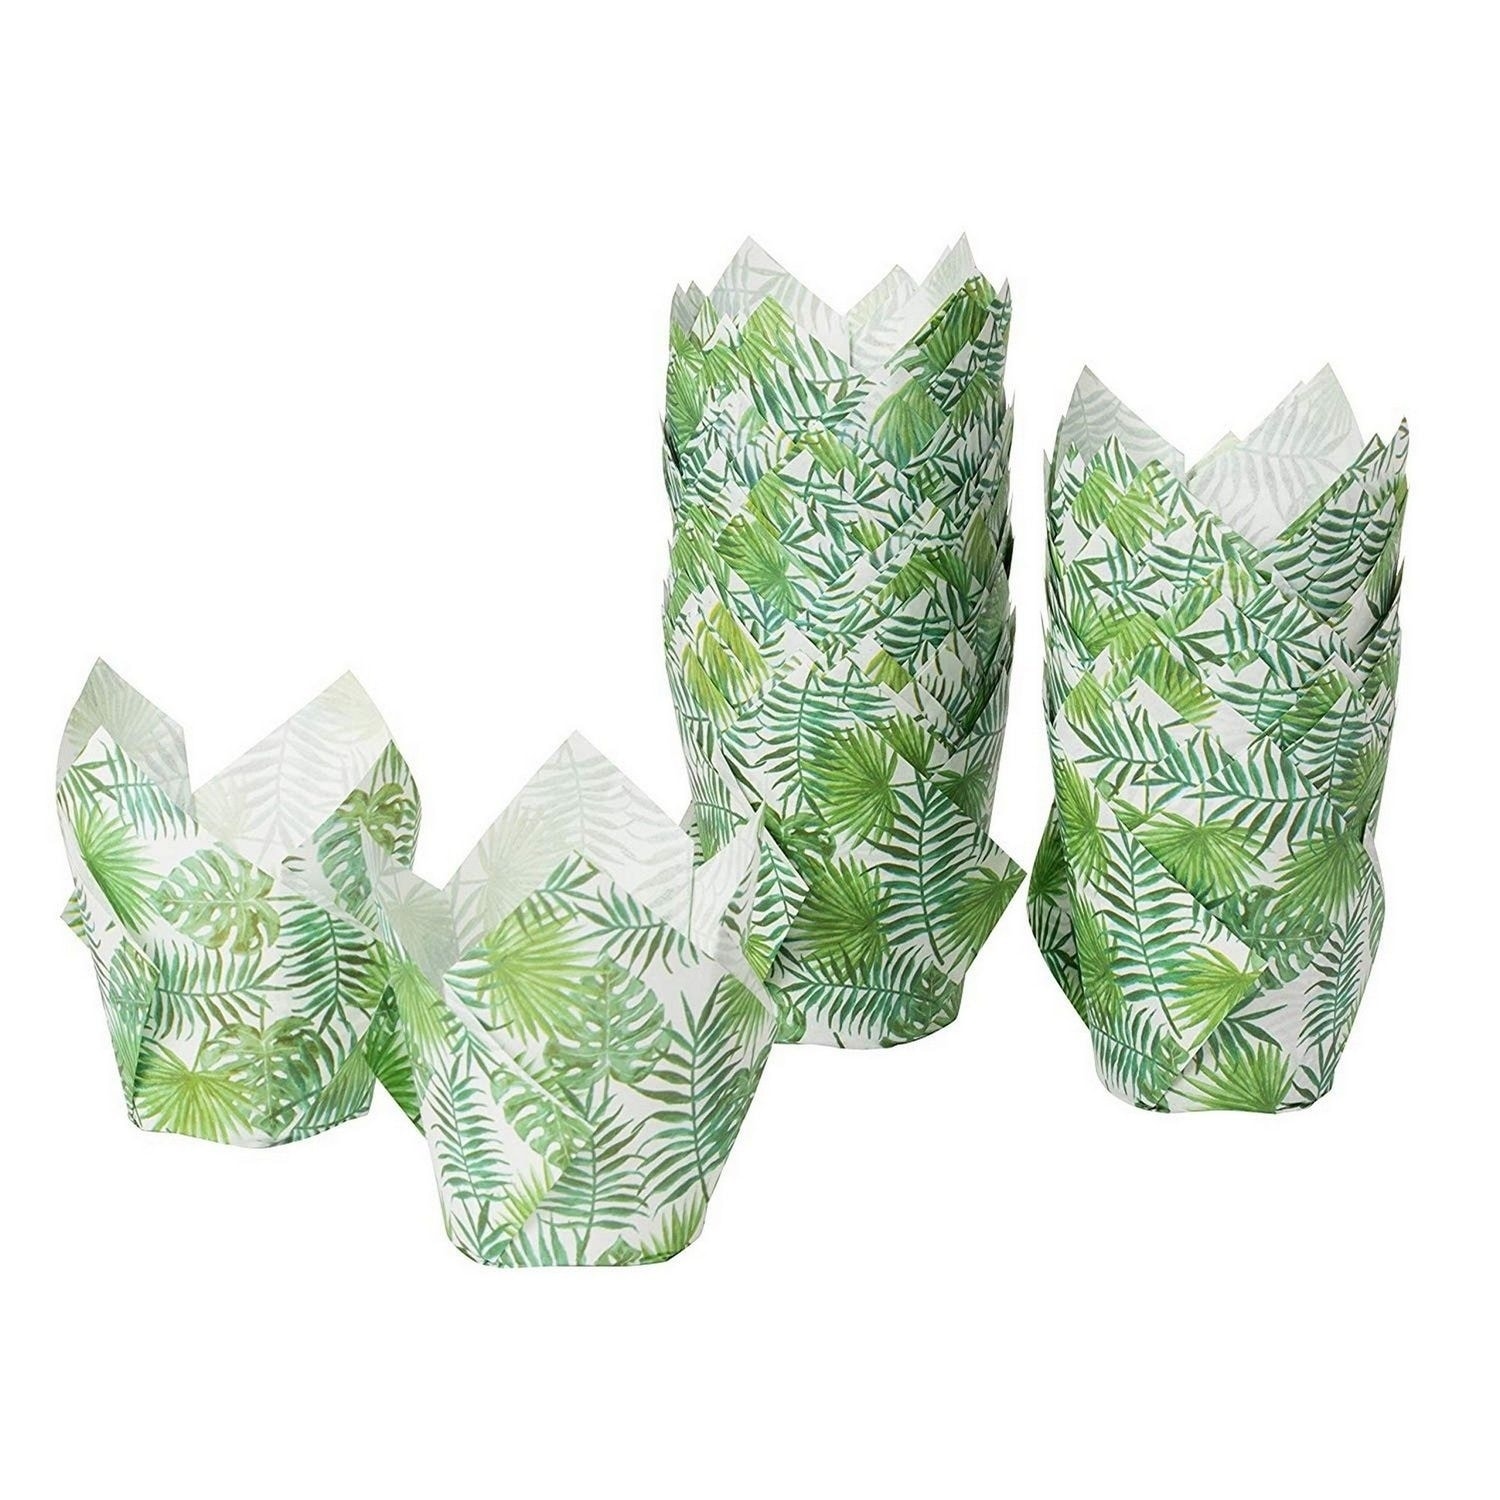 https://ak1.ostkcdn.com/images/products/29875334/300-Pack-Cupcake-Muffin-Liners-Baking-Cups-for-Weddings-Baby-Showers-Palm-Leaf-c698086f-e99d-40a1-a0b9-0fc333296027.jpg